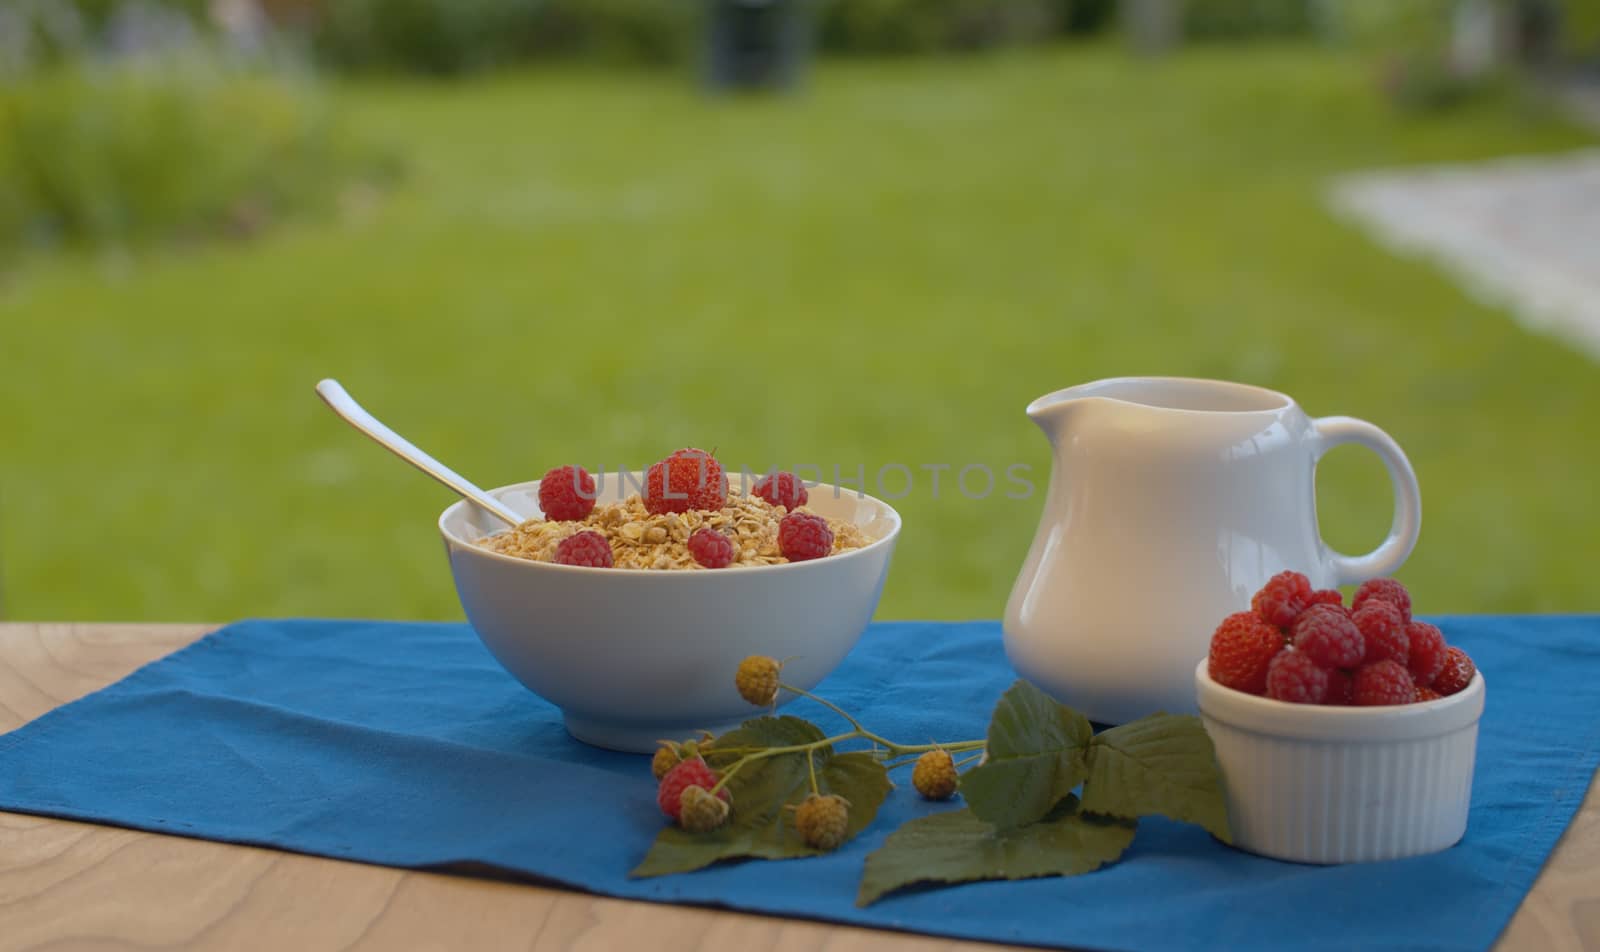 Bowl of muesli with raspberry by Alize